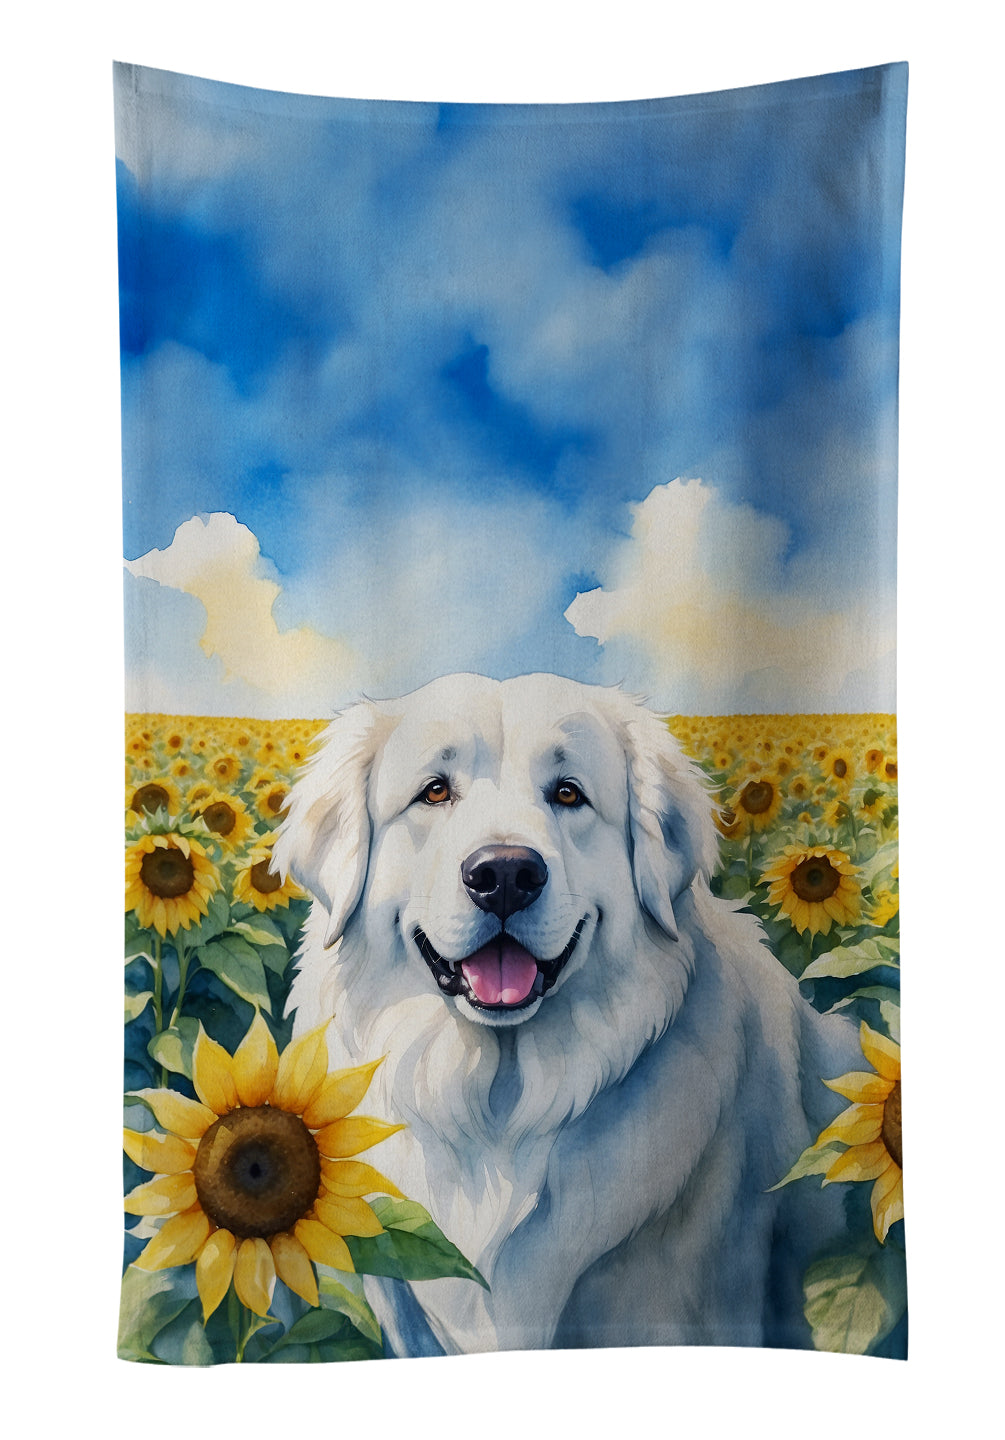 Buy this Great Pyrenees in Sunflowers Kitchen Towel